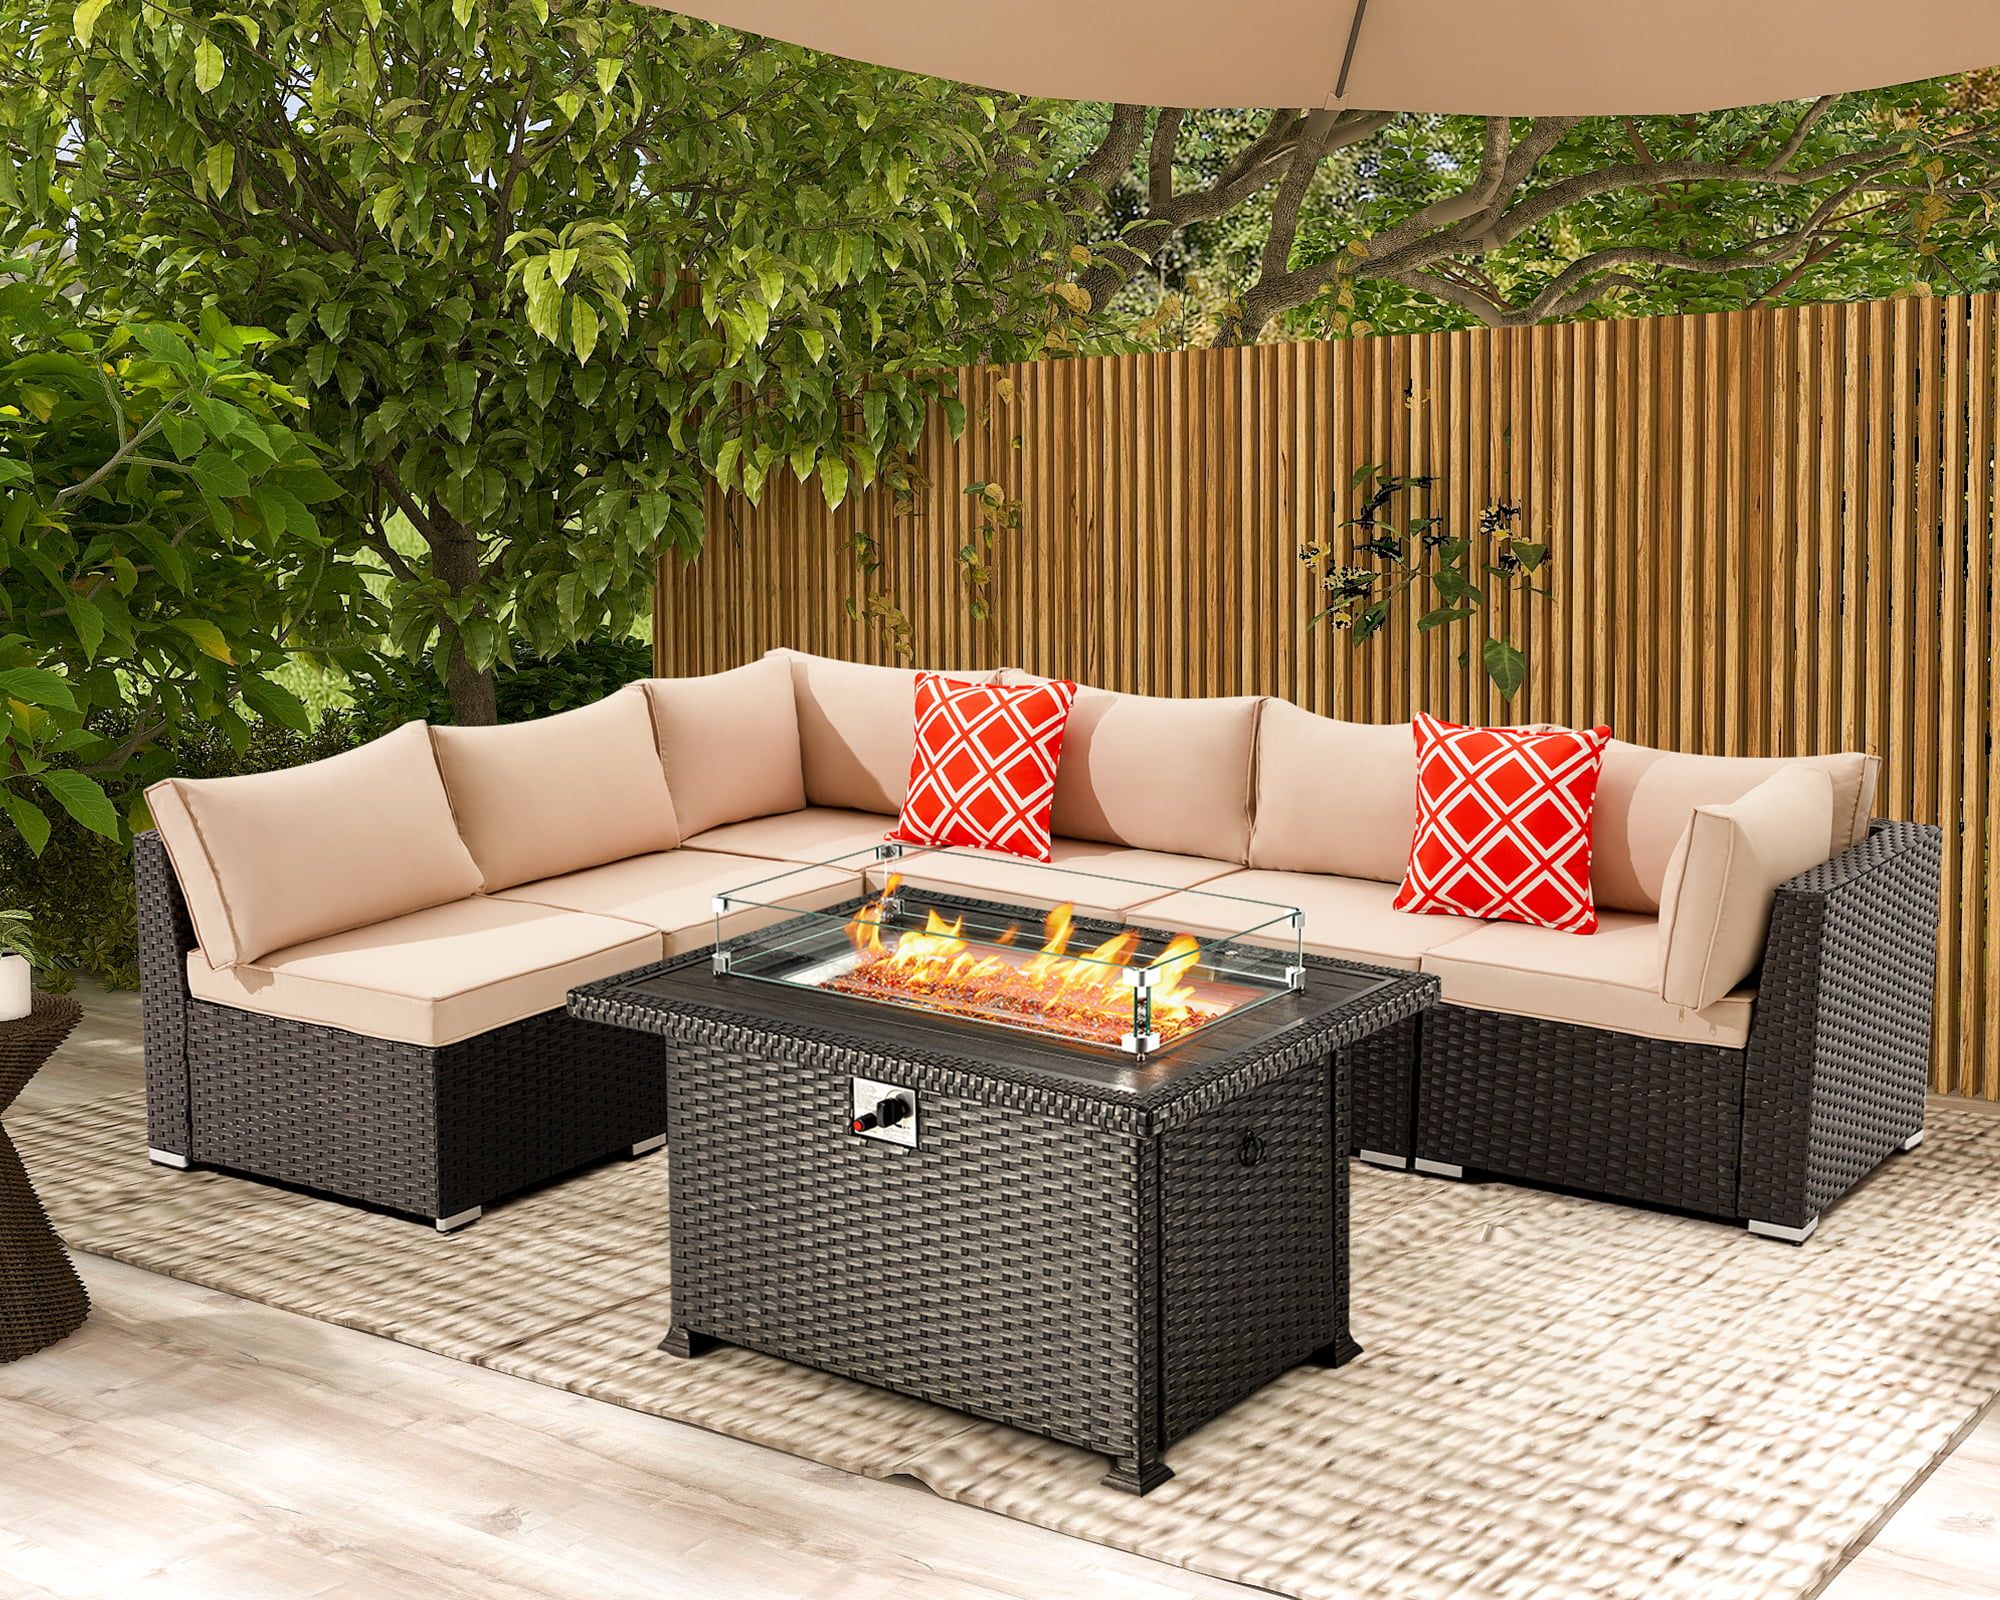 Hugiee 7 Pieces Patio Furniture Wicker Sofa Outdoor Sectional Sets With  44 Inch 50,000 Btu Gas Fire Pit Table Auto Ignition Propane Fire Pit Table,  Khaki – Walmart Pertaining To Fire Pit Table Wicker Sectional Sofa Conversation Set (View 3 of 15)